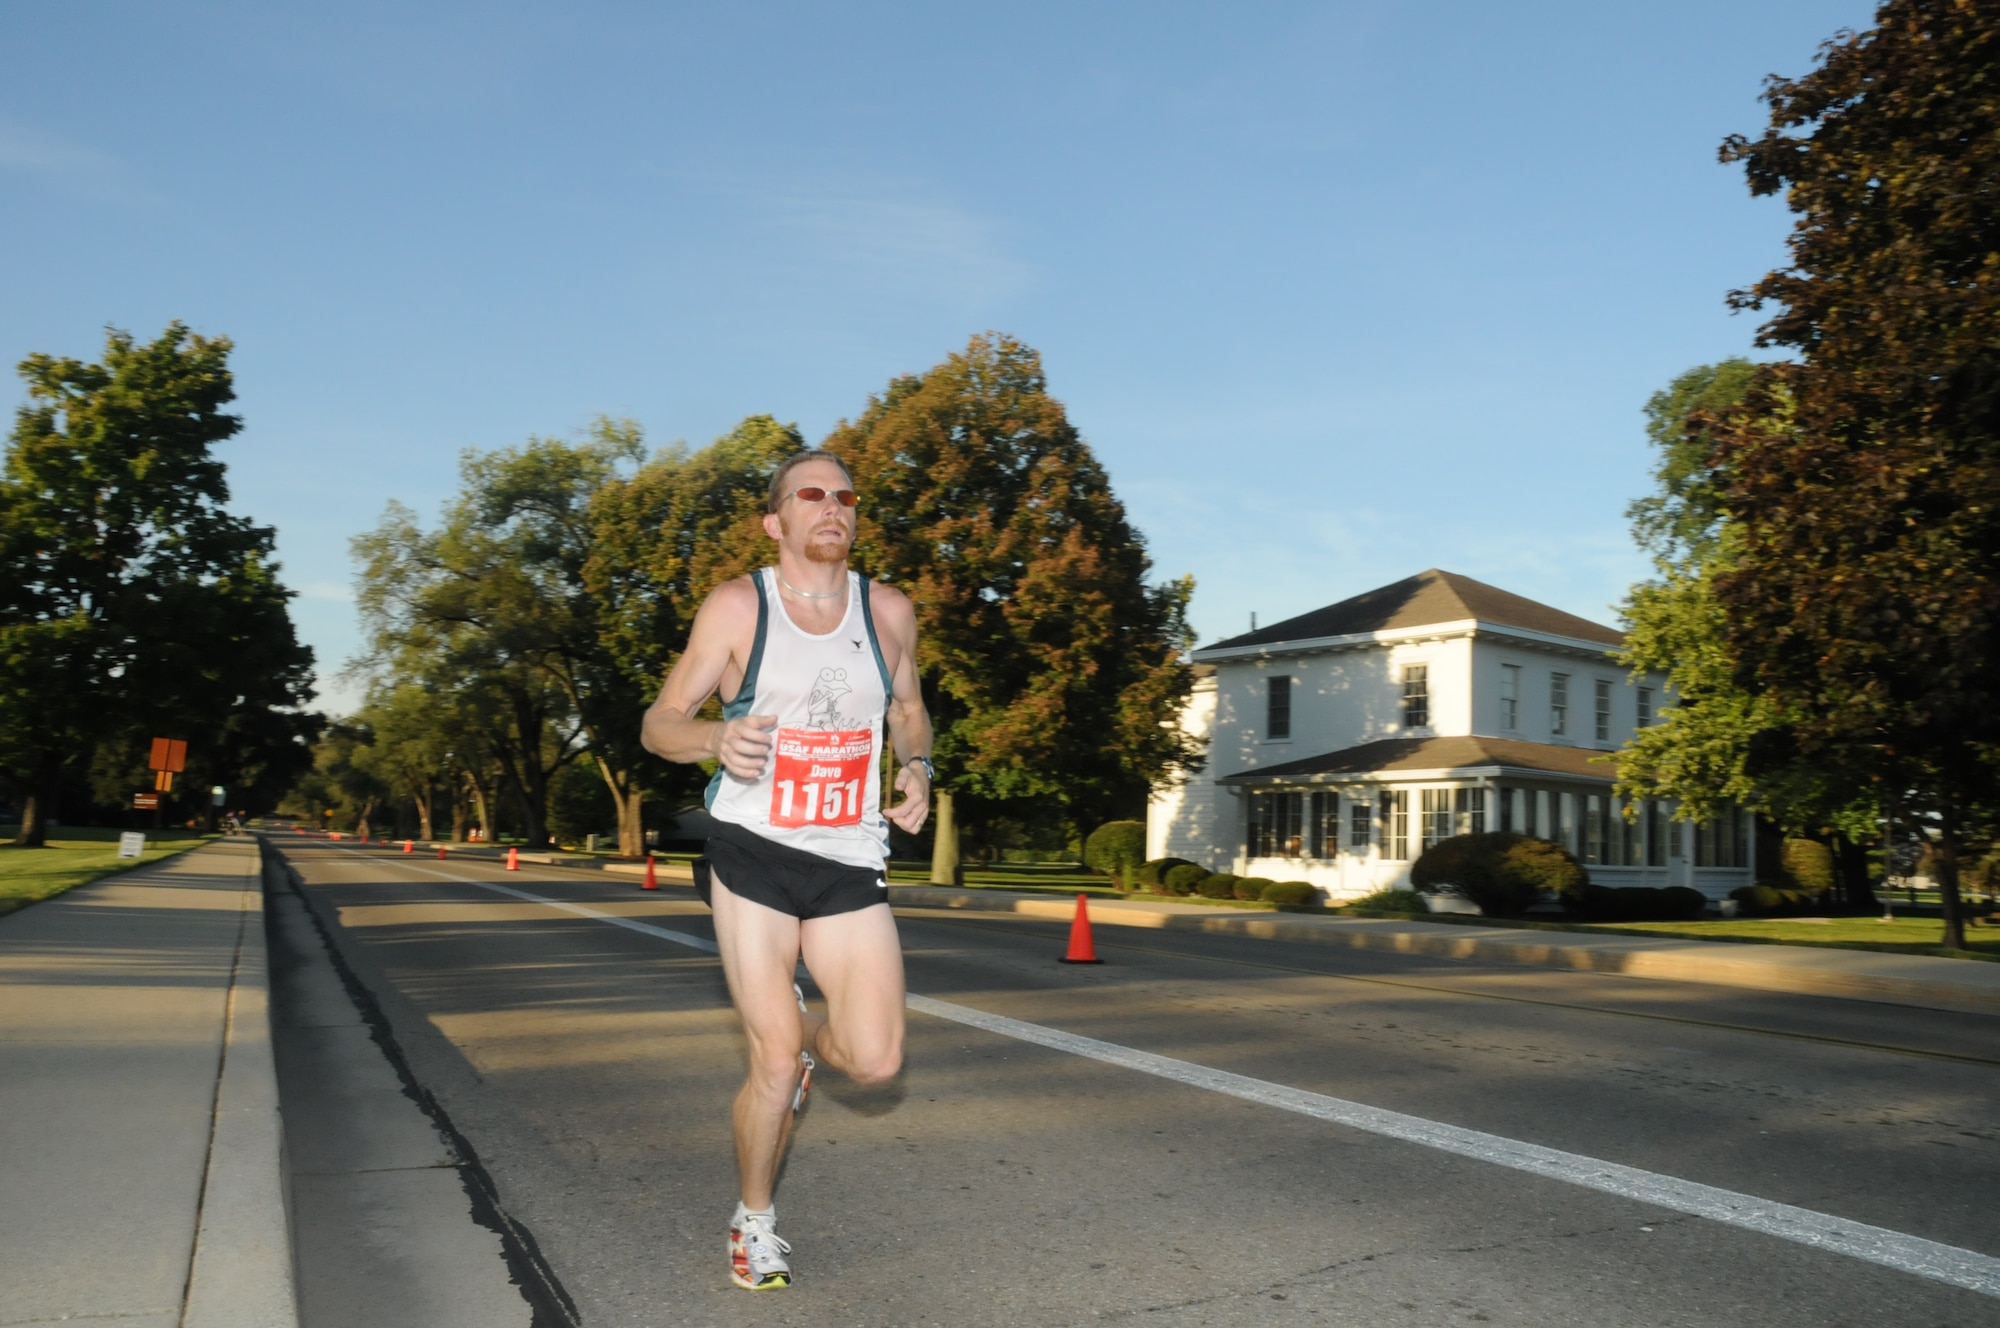 Dave Johnston, the male winner of the full marathon, passes the Arnold House at approximately the 8.5 mile mark.  The oldest building on Wright-Patterson, the house is named for Gen. Henry ‘Hap’ Arnold who lived there while he was base commander.  (US Air Force photo by Al Bright)